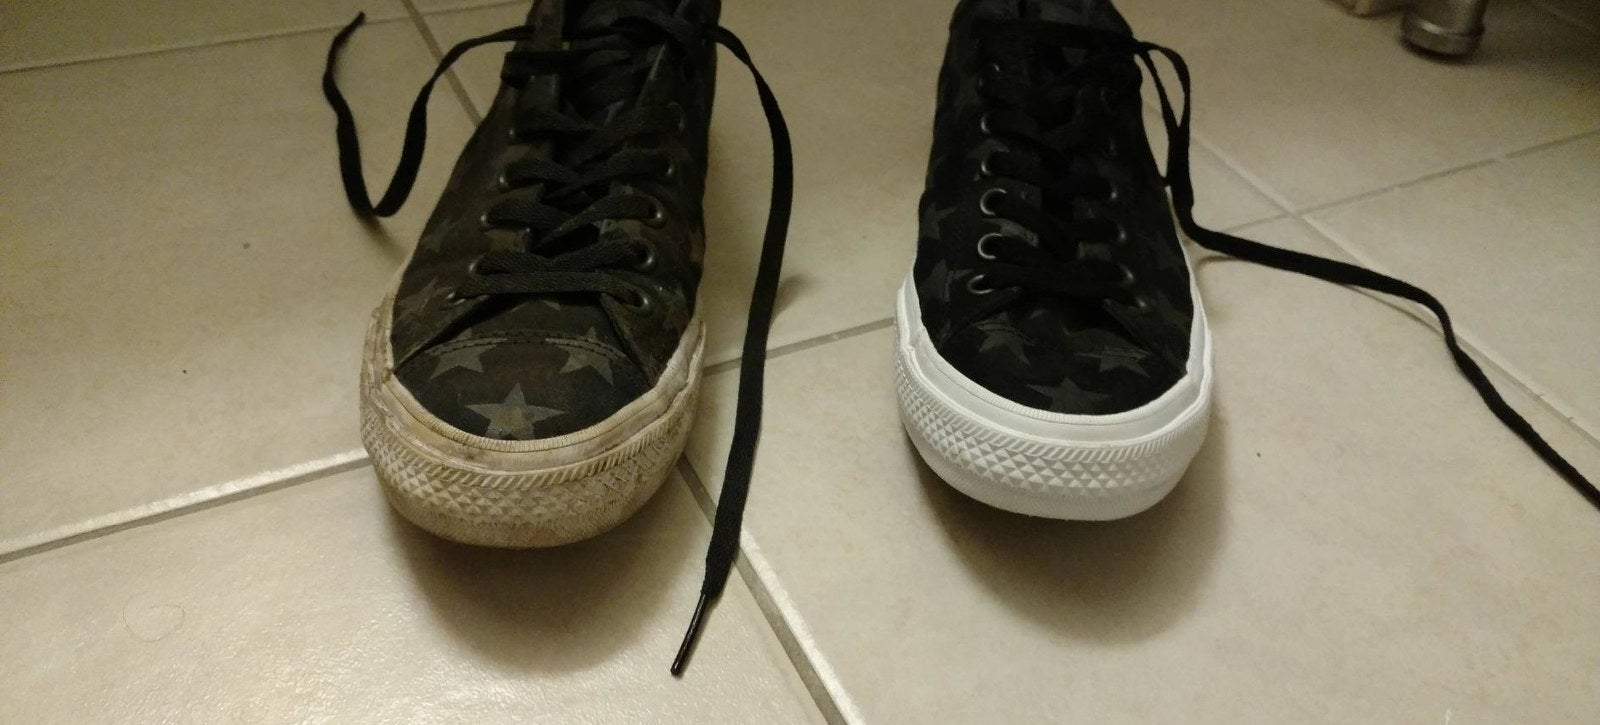 A reviewer&#x27;s pair of sneakers: one with very dirty soles and sides and the other looking basically brand new white